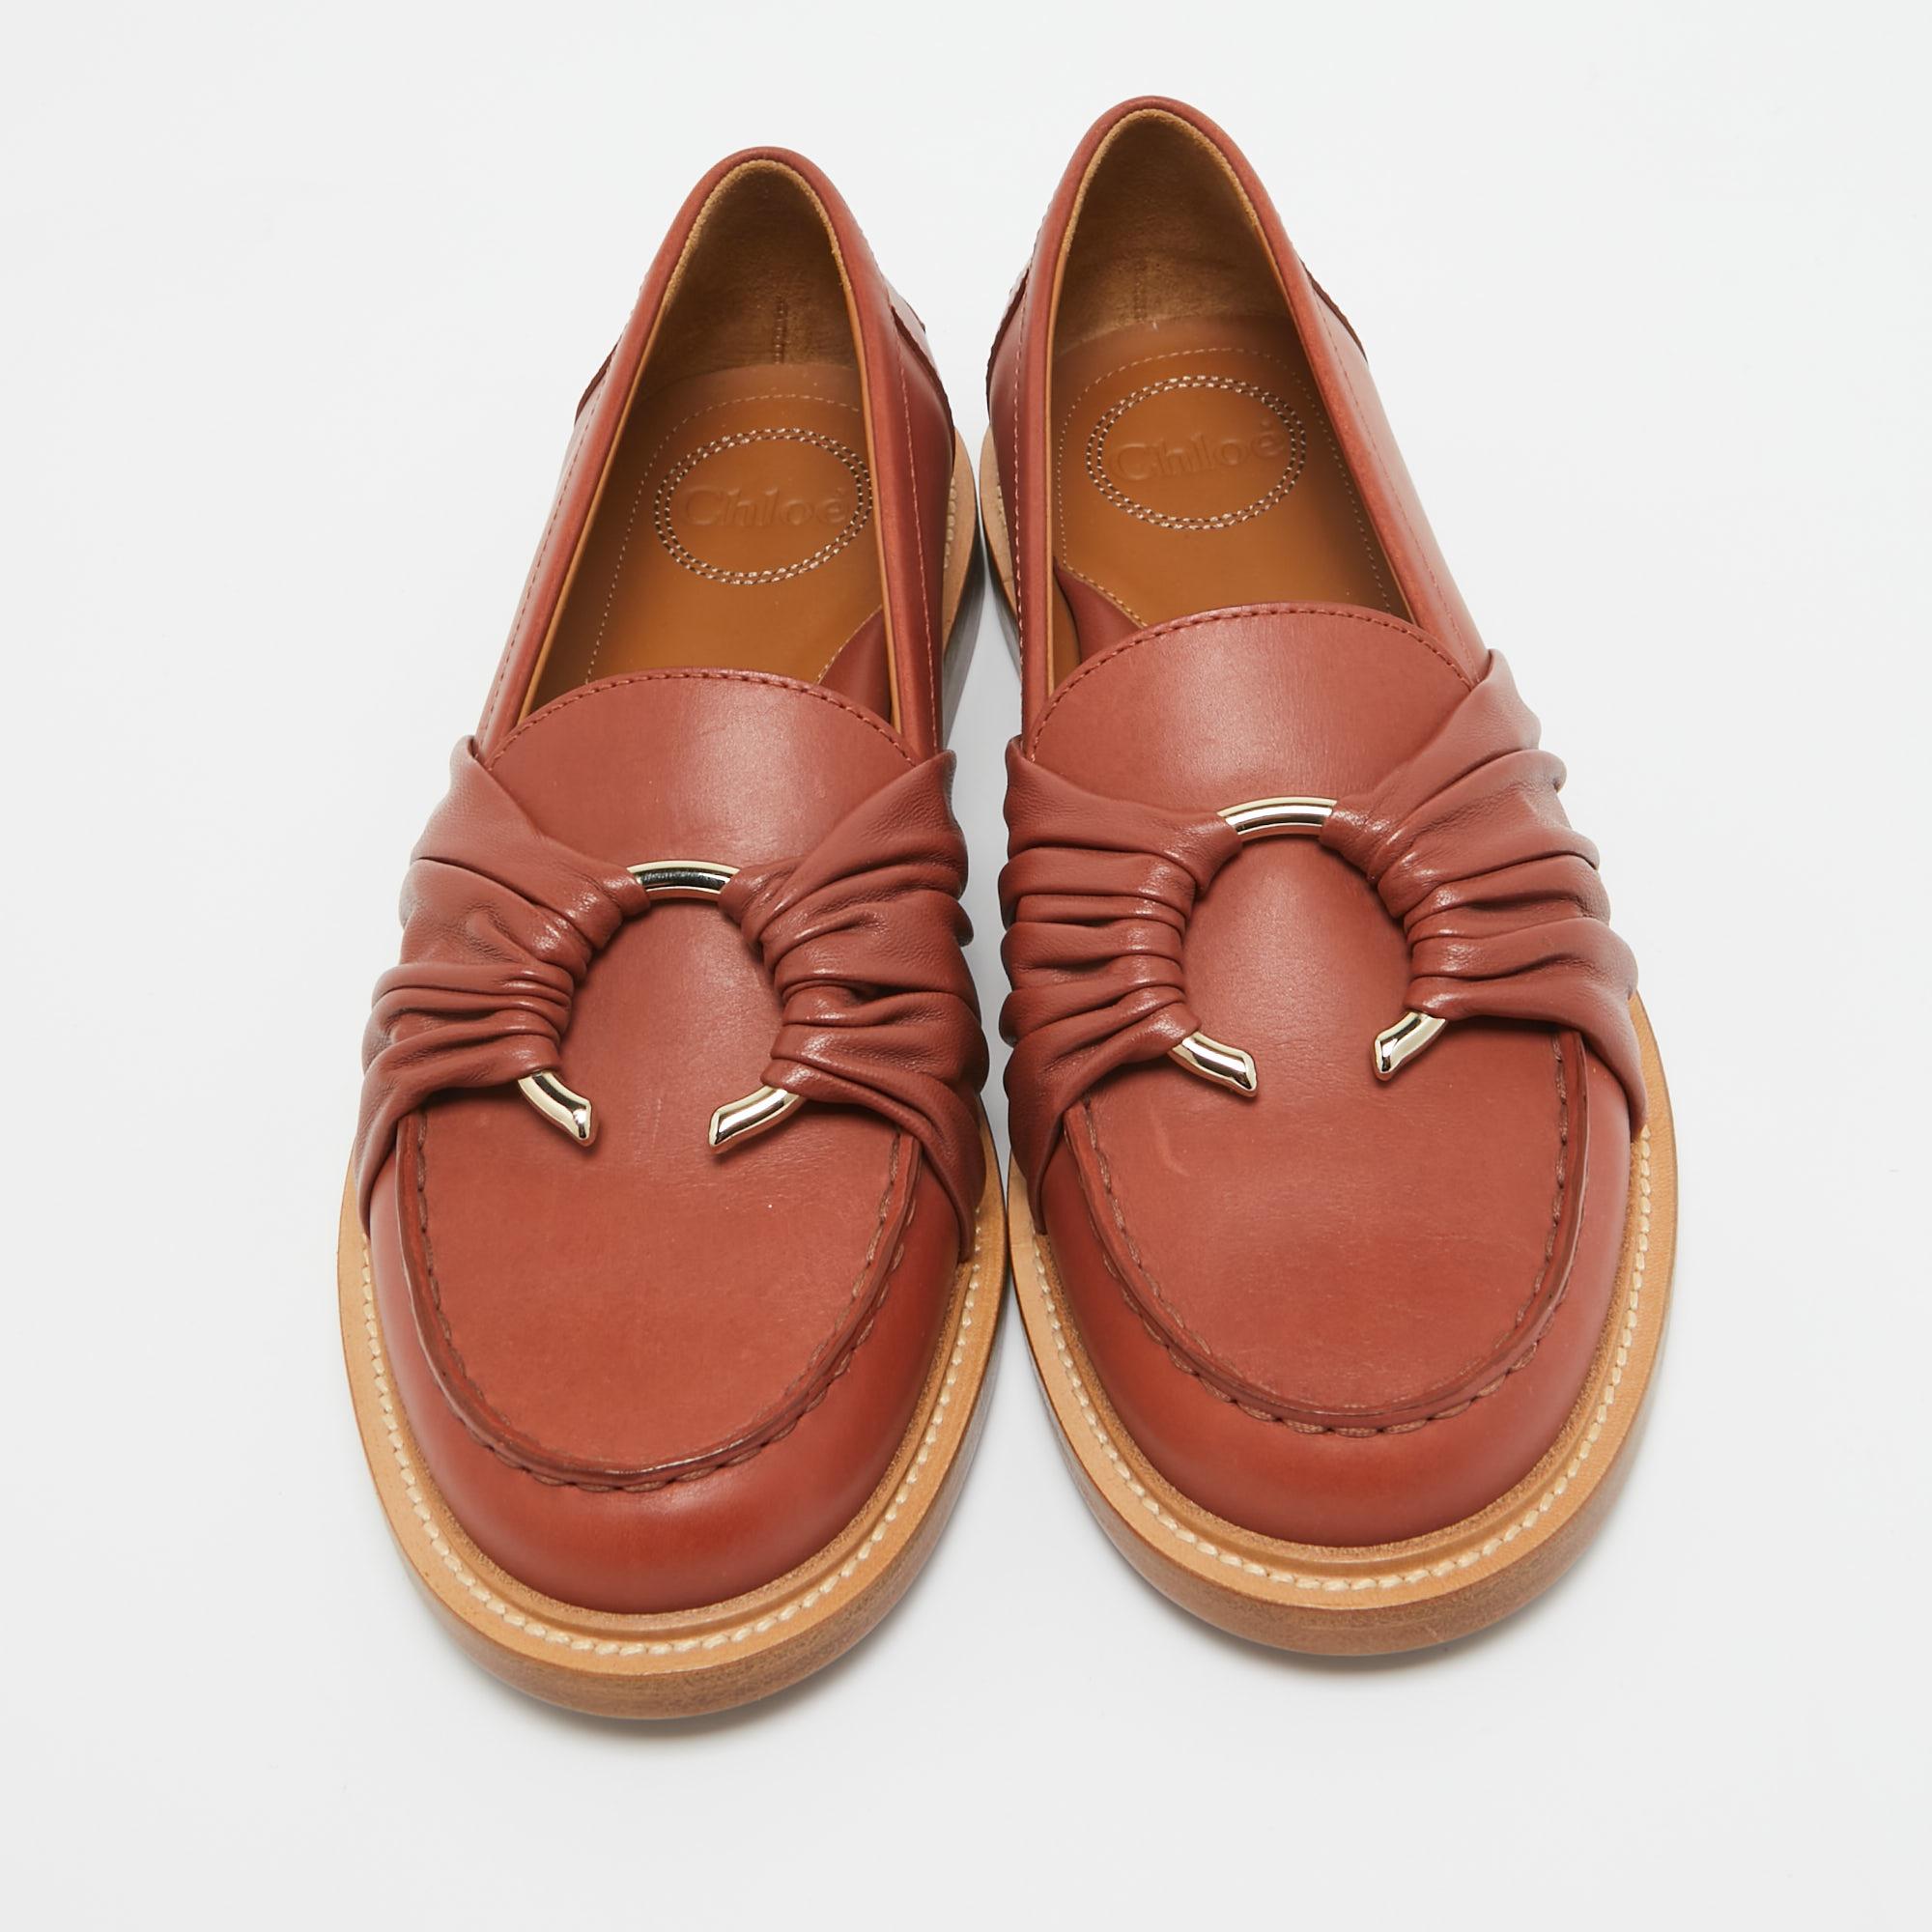 Chloe Brown Leather C Logo Loafers Size 38 For Sale 1